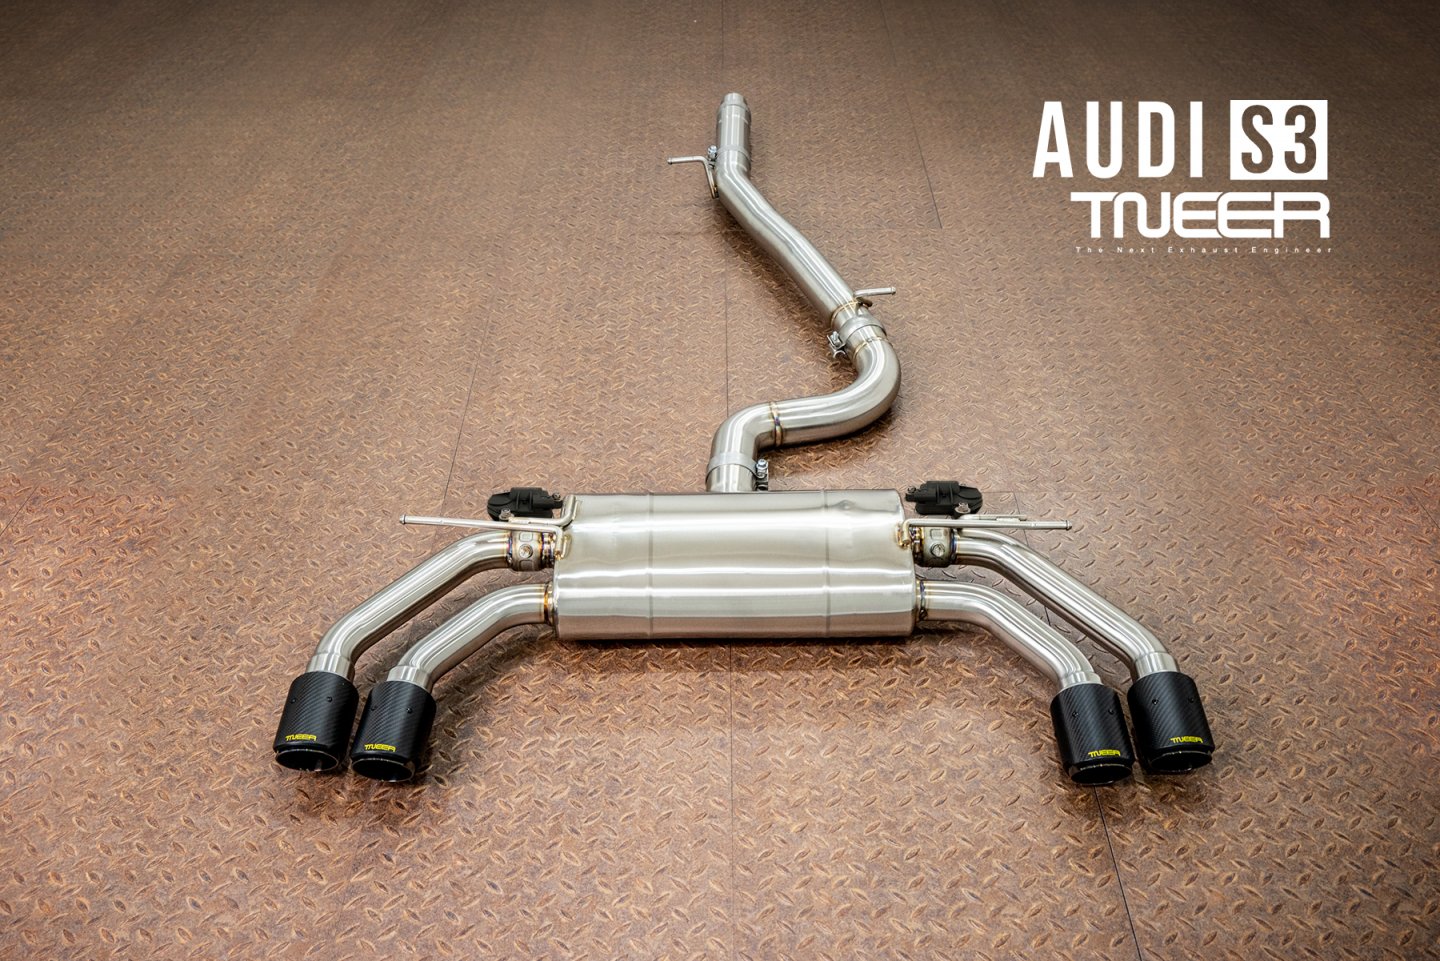 Audi RS5 (B8) 4.2 FSI TNEER Exhaust System with TACS